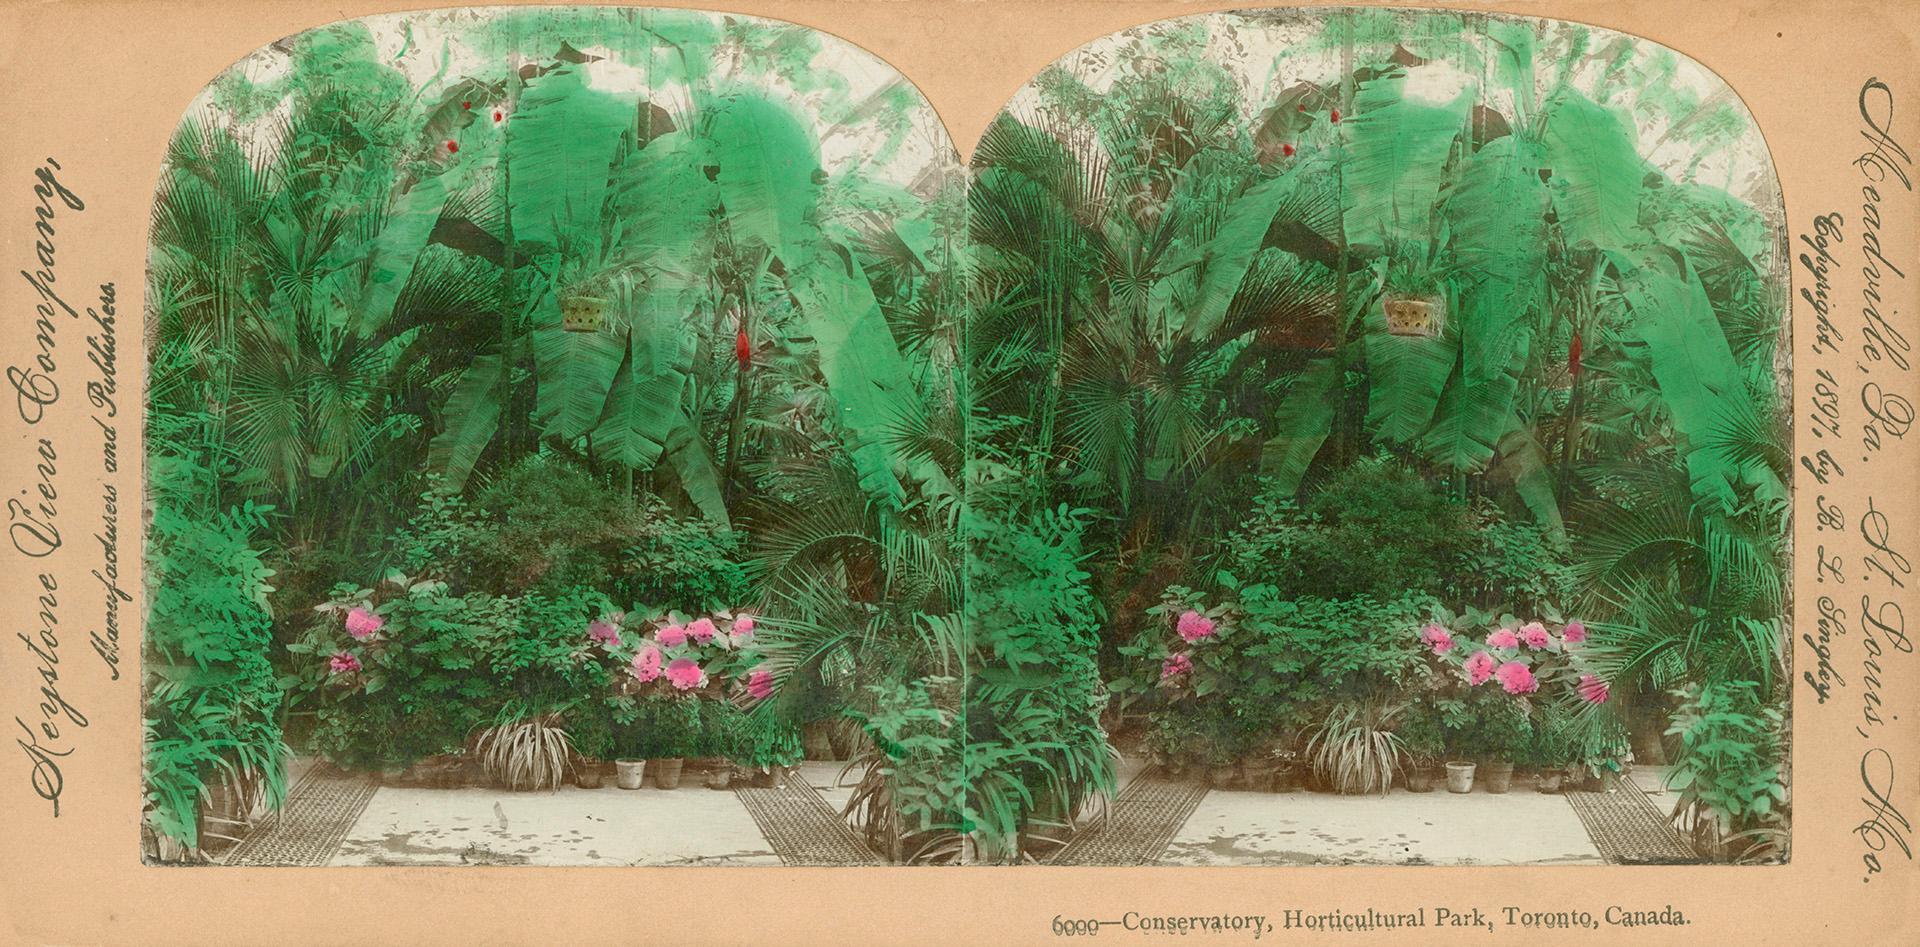 Colored pictures show large ferns and other plants in pots growing in a glassed in room.